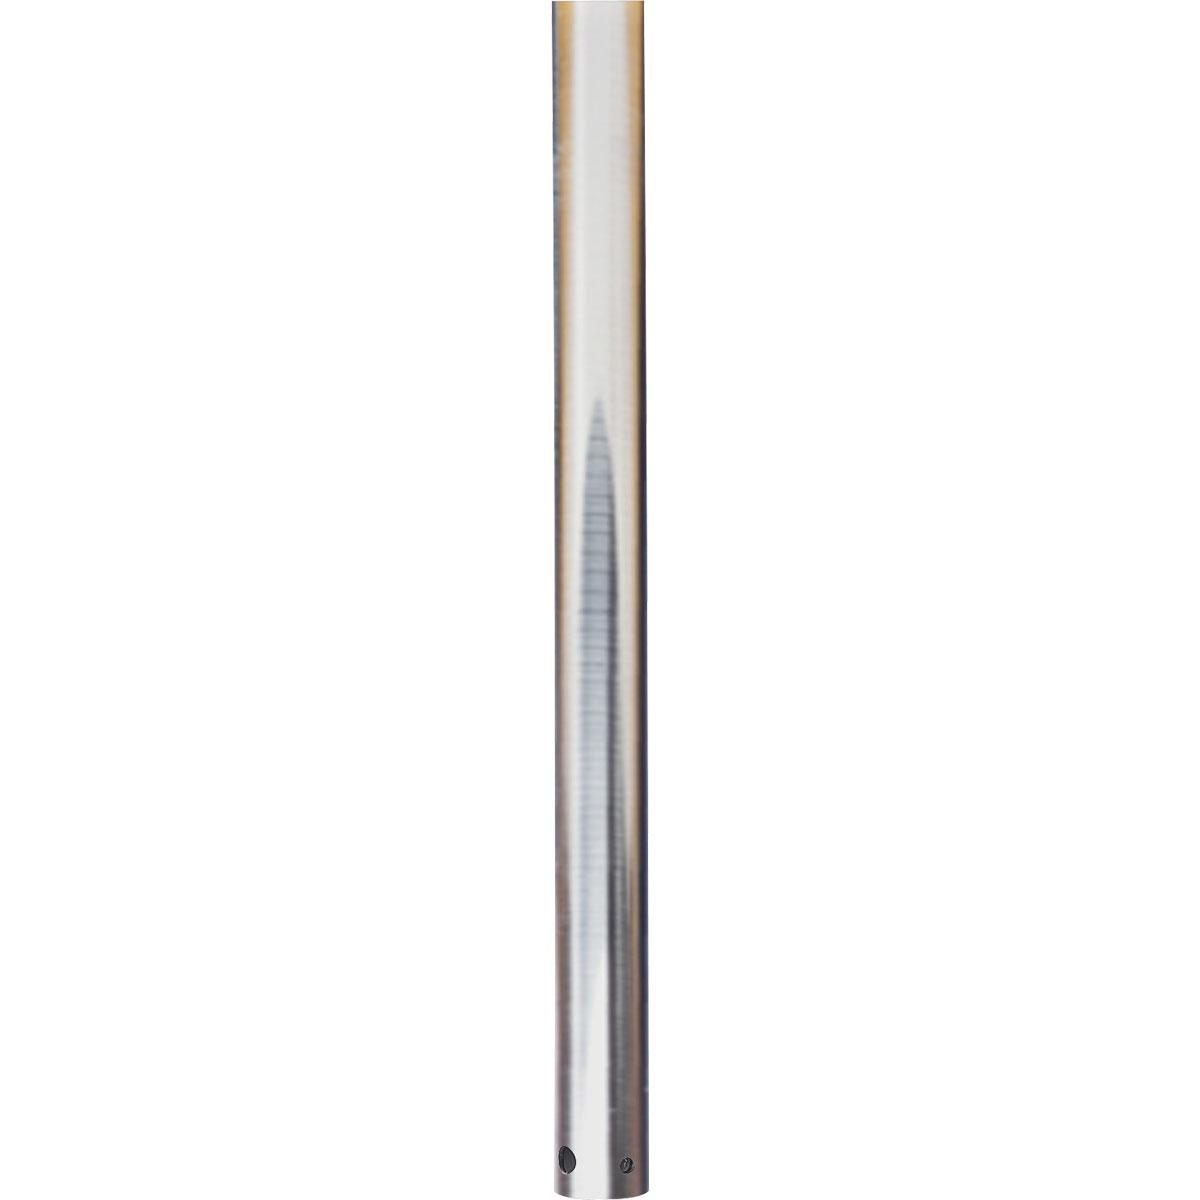 Hubbell P2606-09 3/4 In. x 36 In. downrod for use with any Progress Lighting ceiling fan. Use of a fan downrod positions your ceiling fan at the optimal height for air circulation and provides the perfect solution for installation on high cathedral ceilings or in great ro